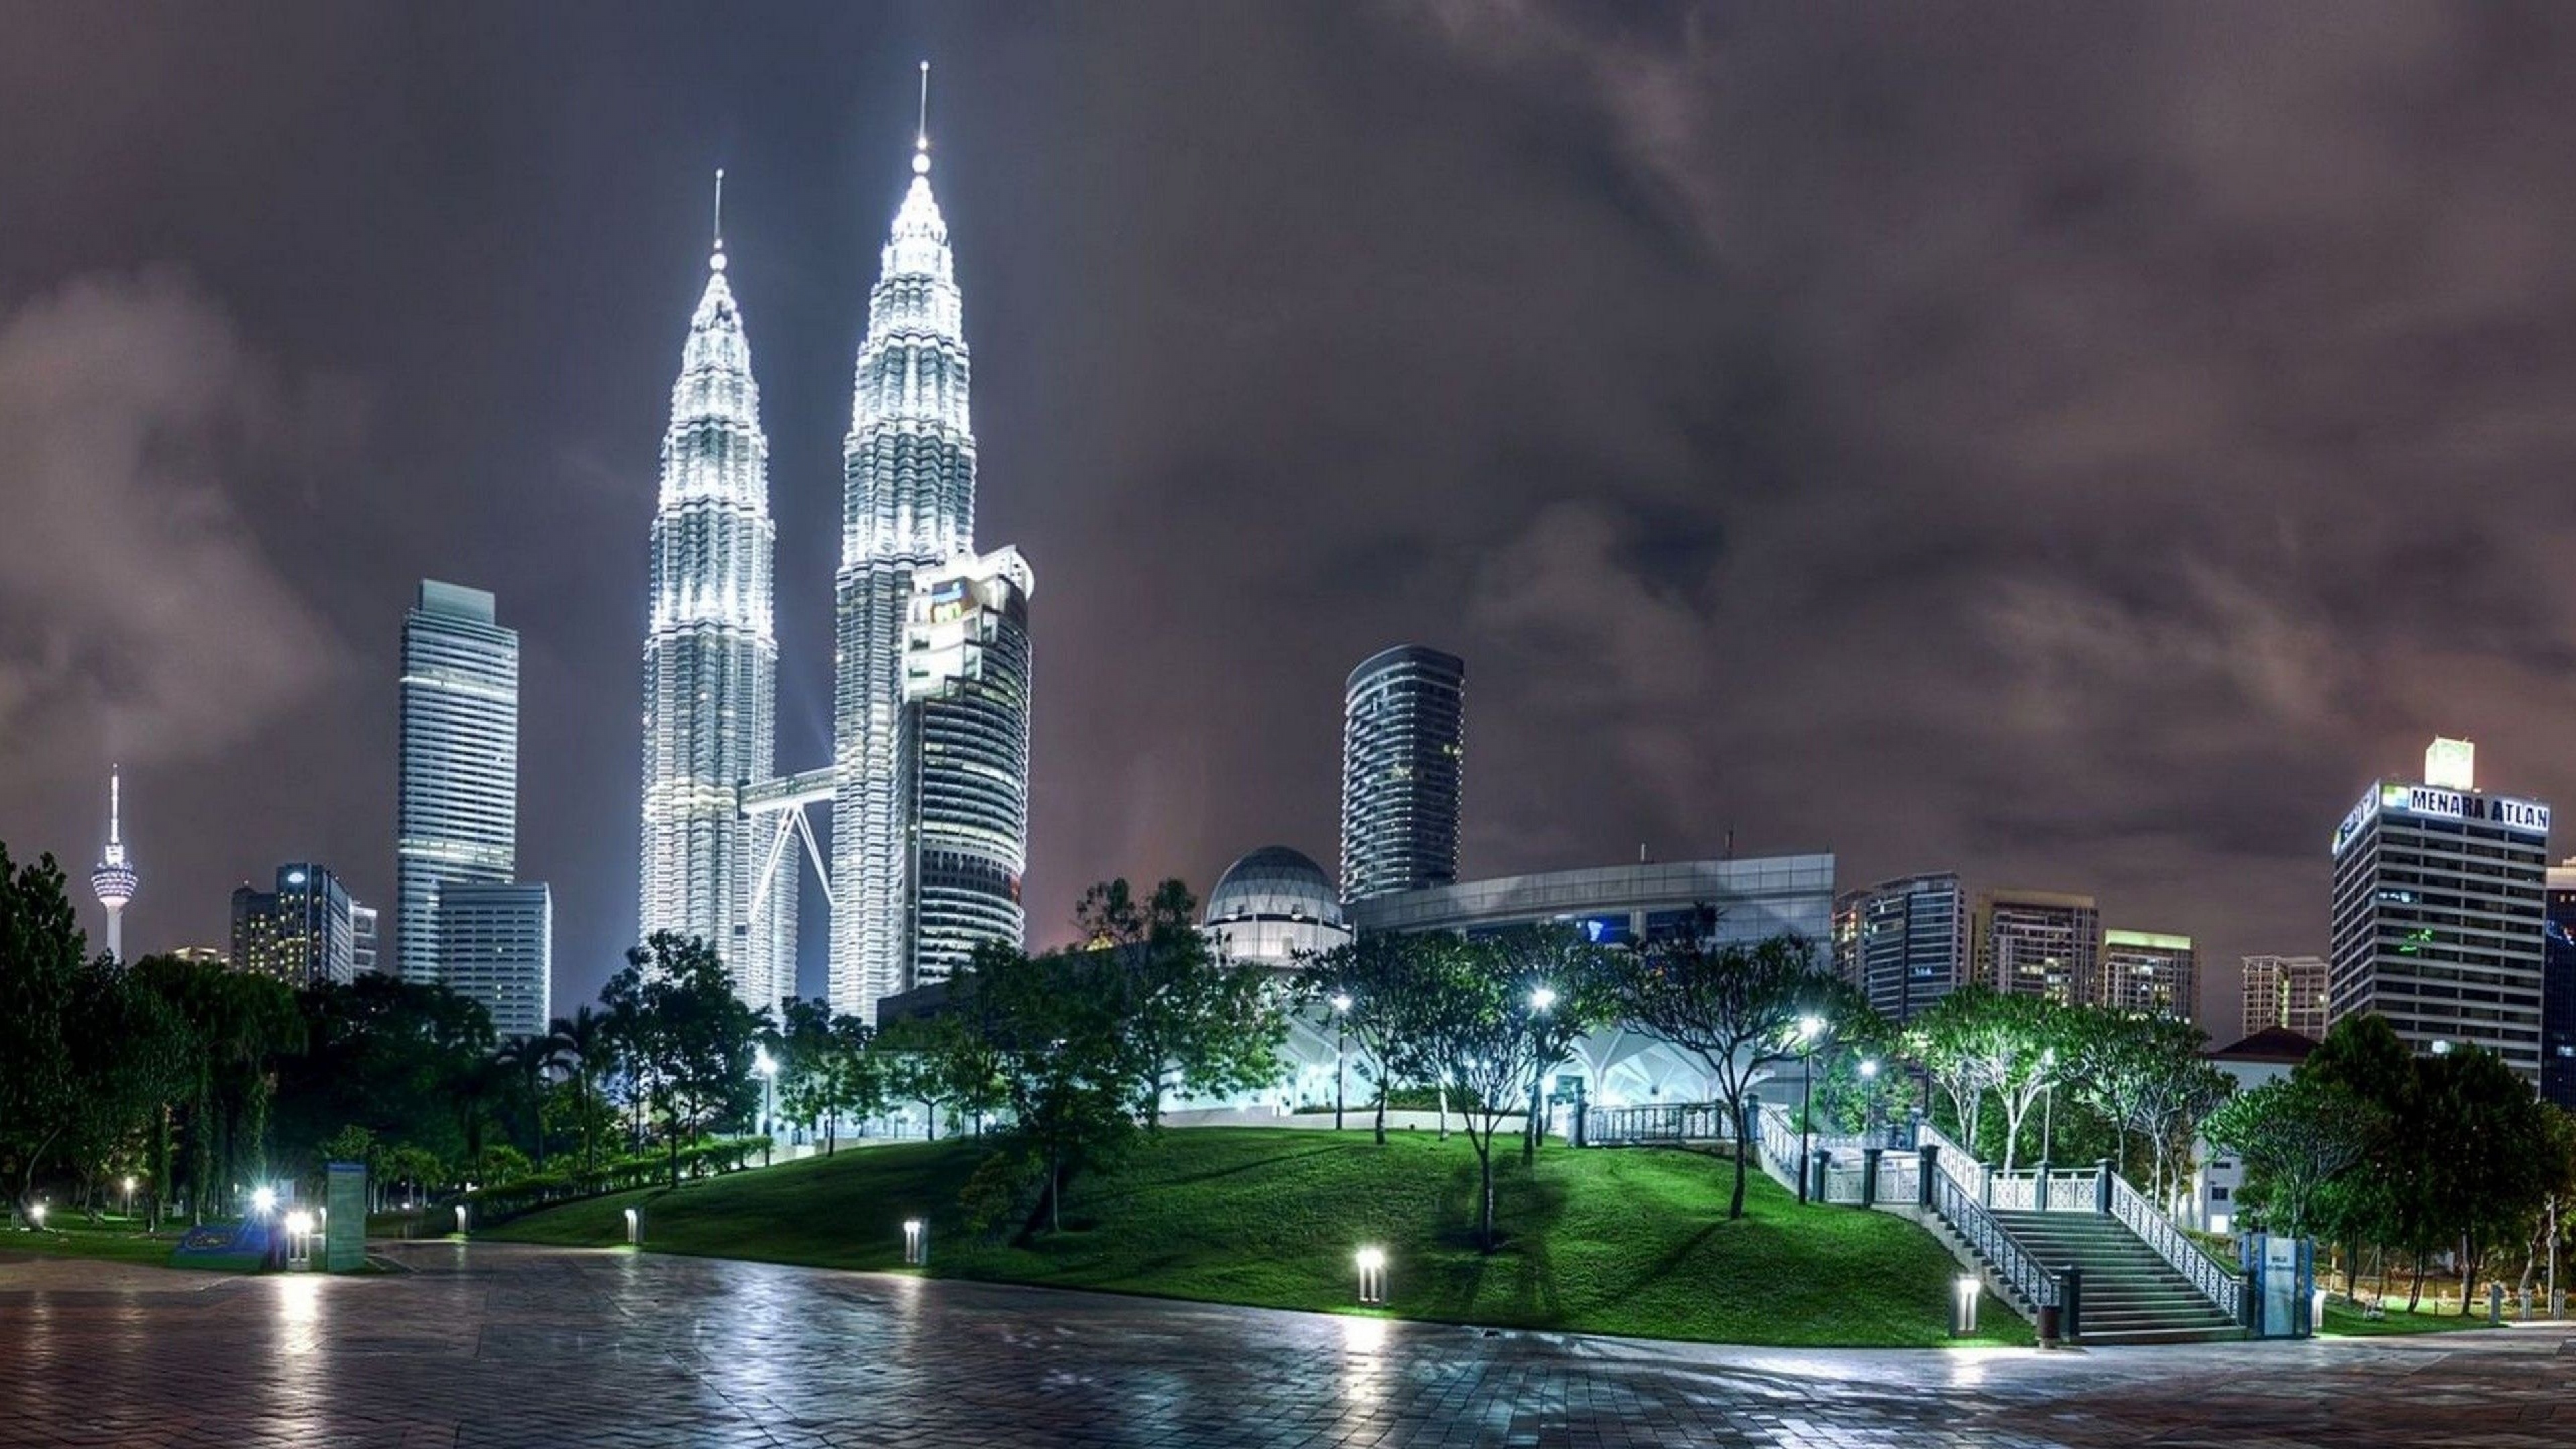 Malaysia HD Wallpaper Background Of Your Choice